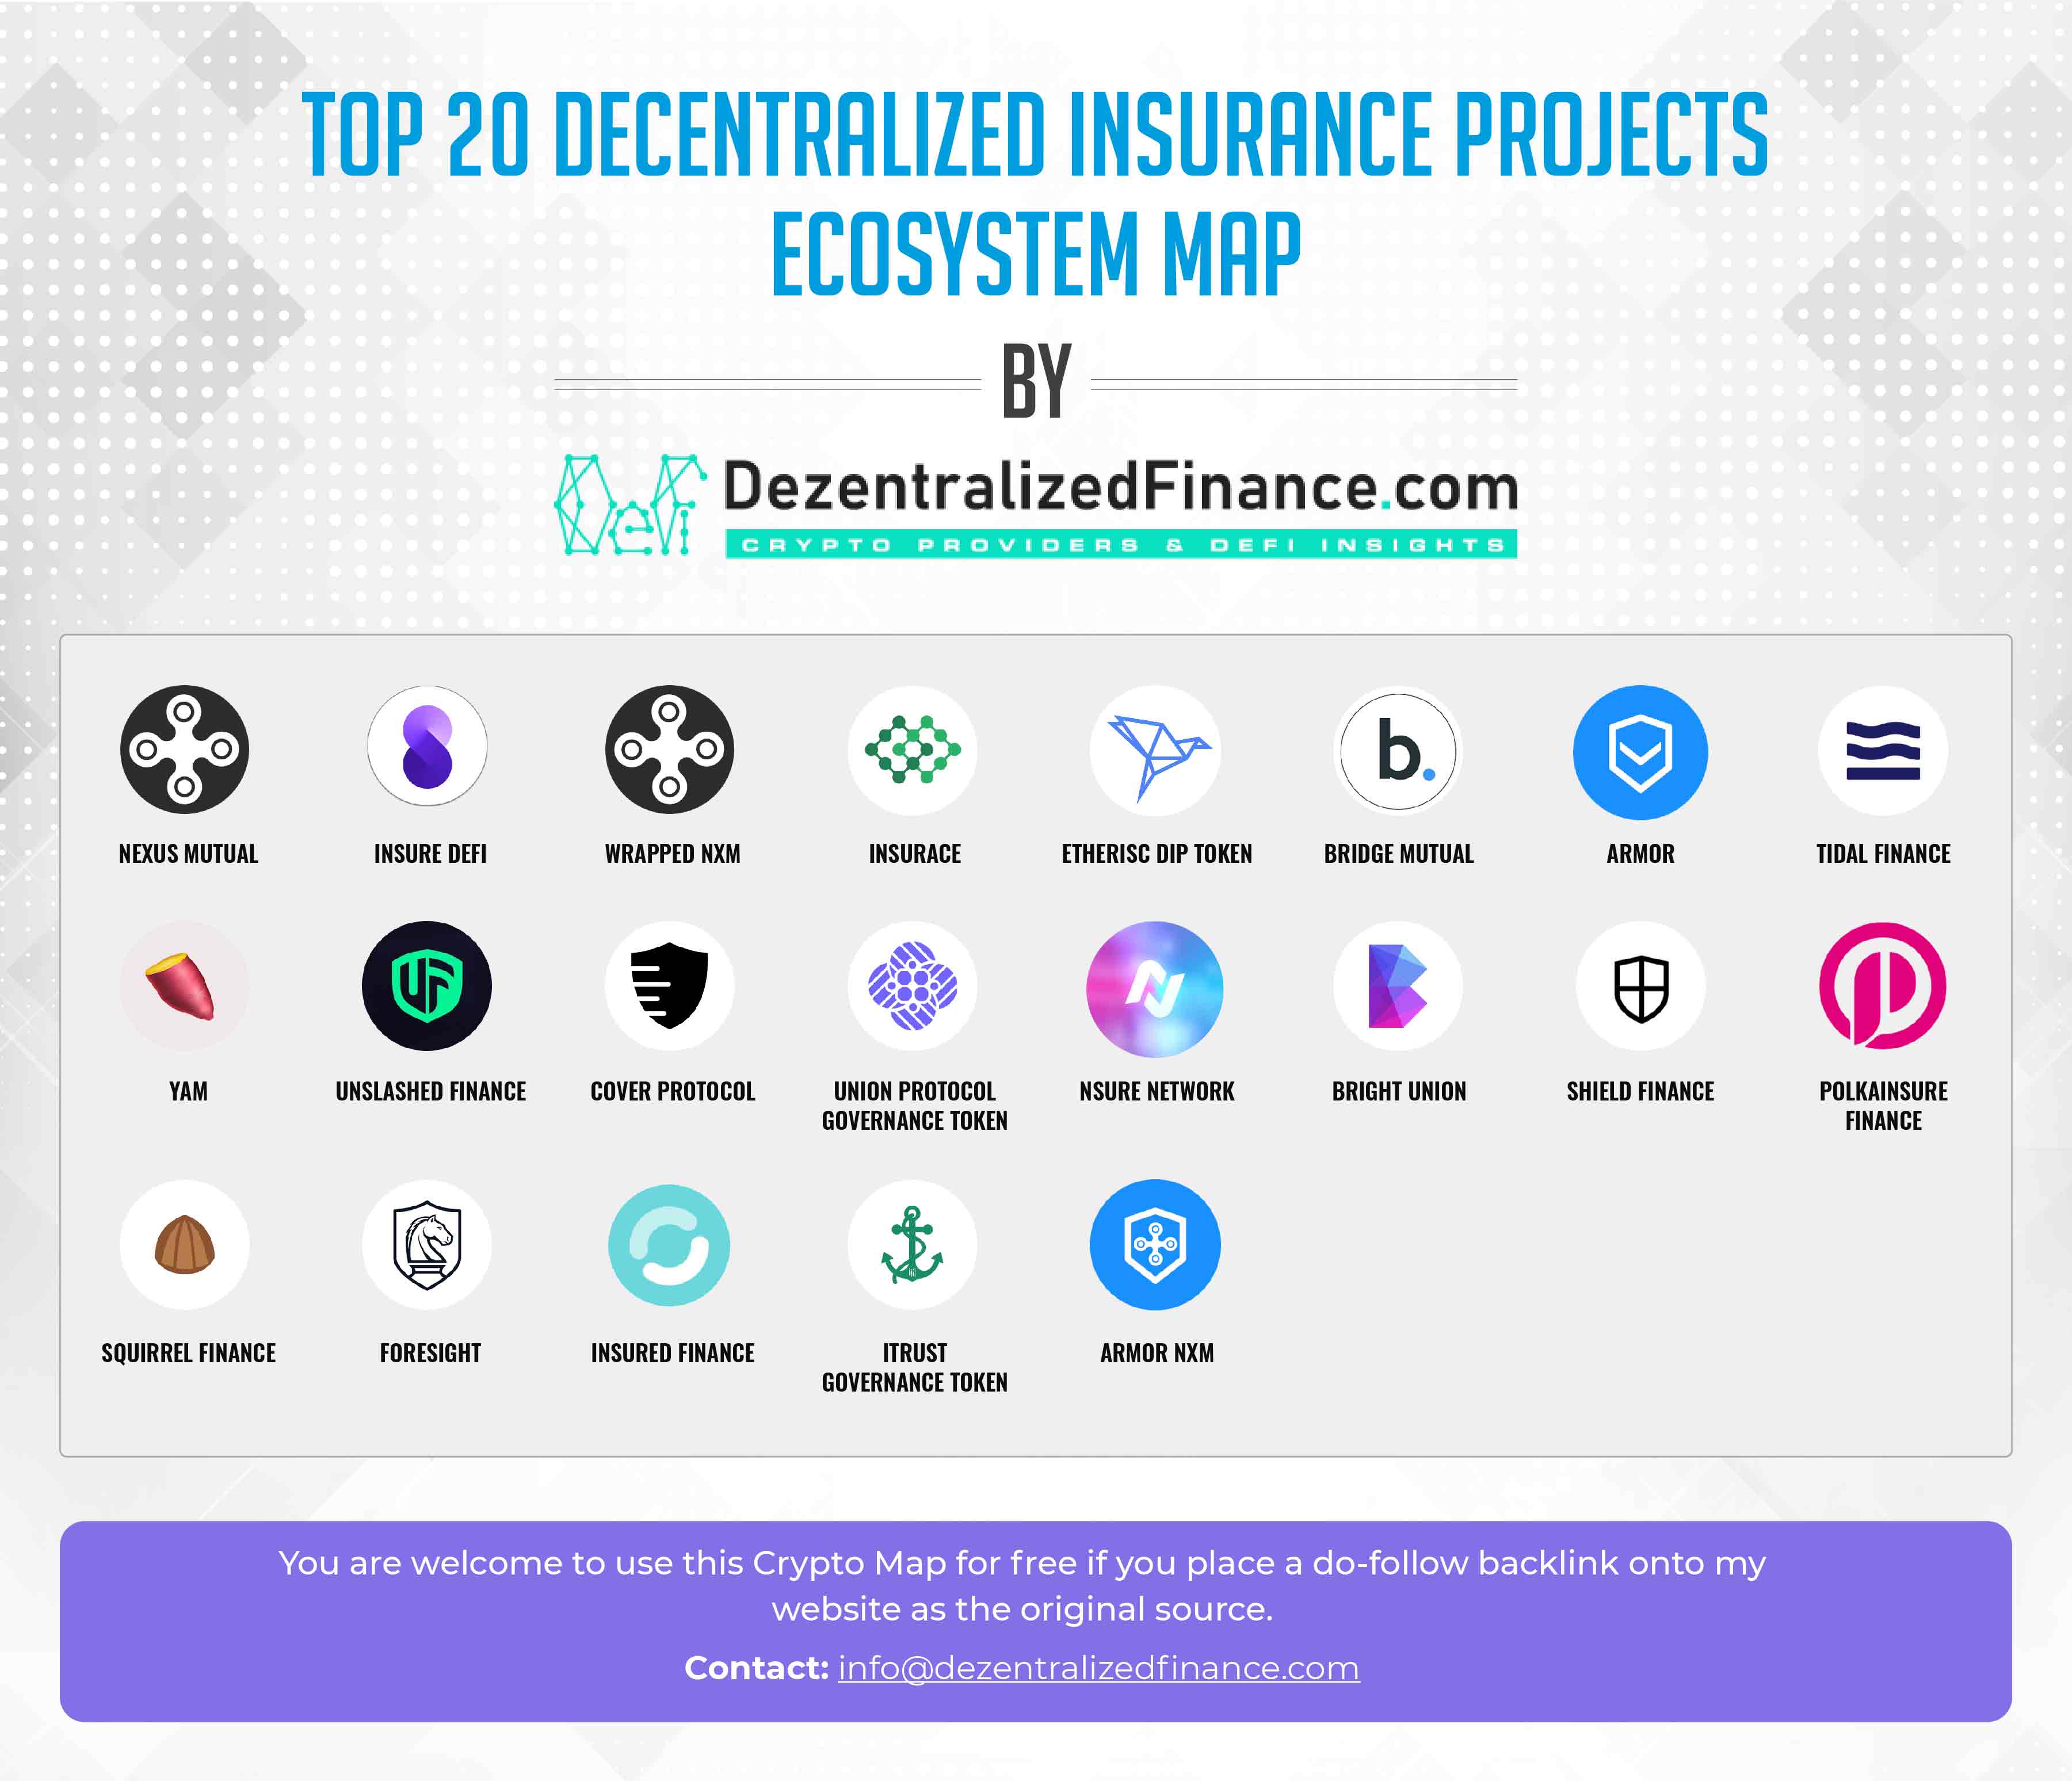 Top 20 Decentralized Insurance Projects Ecosystem v1 01 2